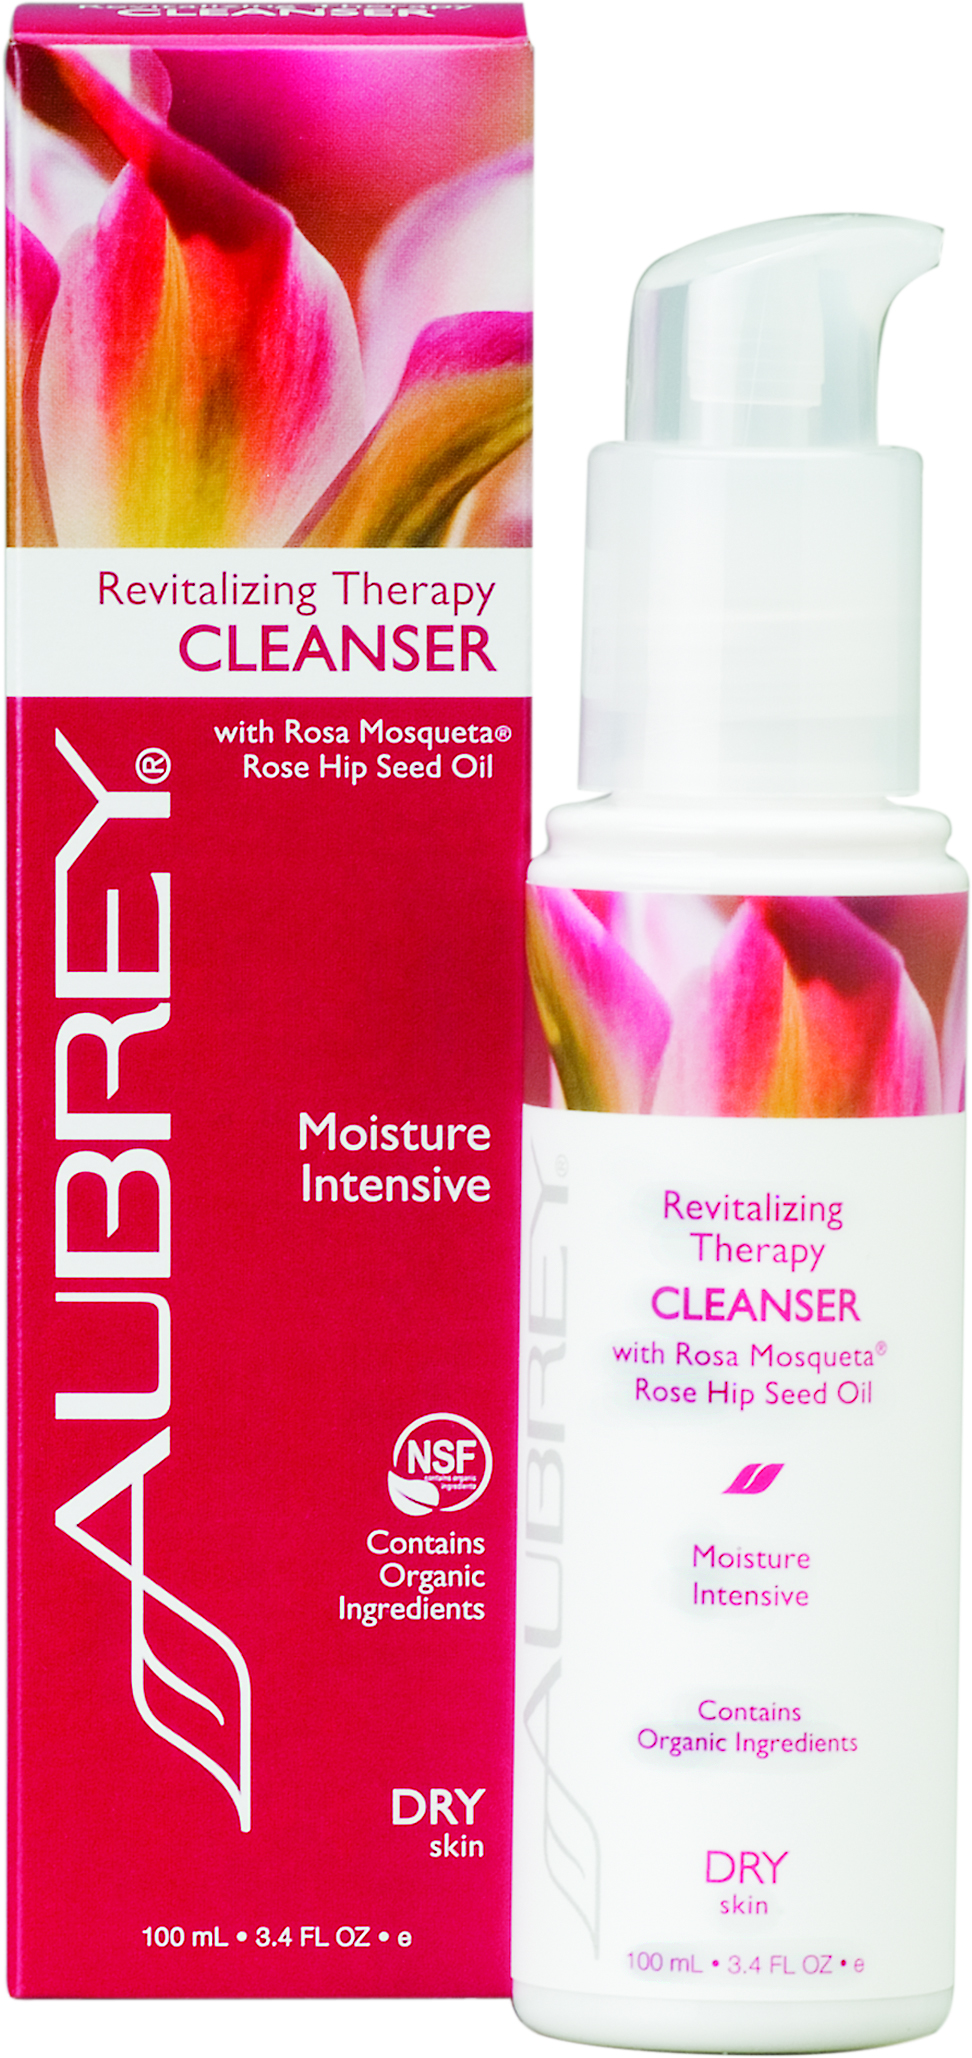 Aubrey Revitalizing Therapy Cleanser